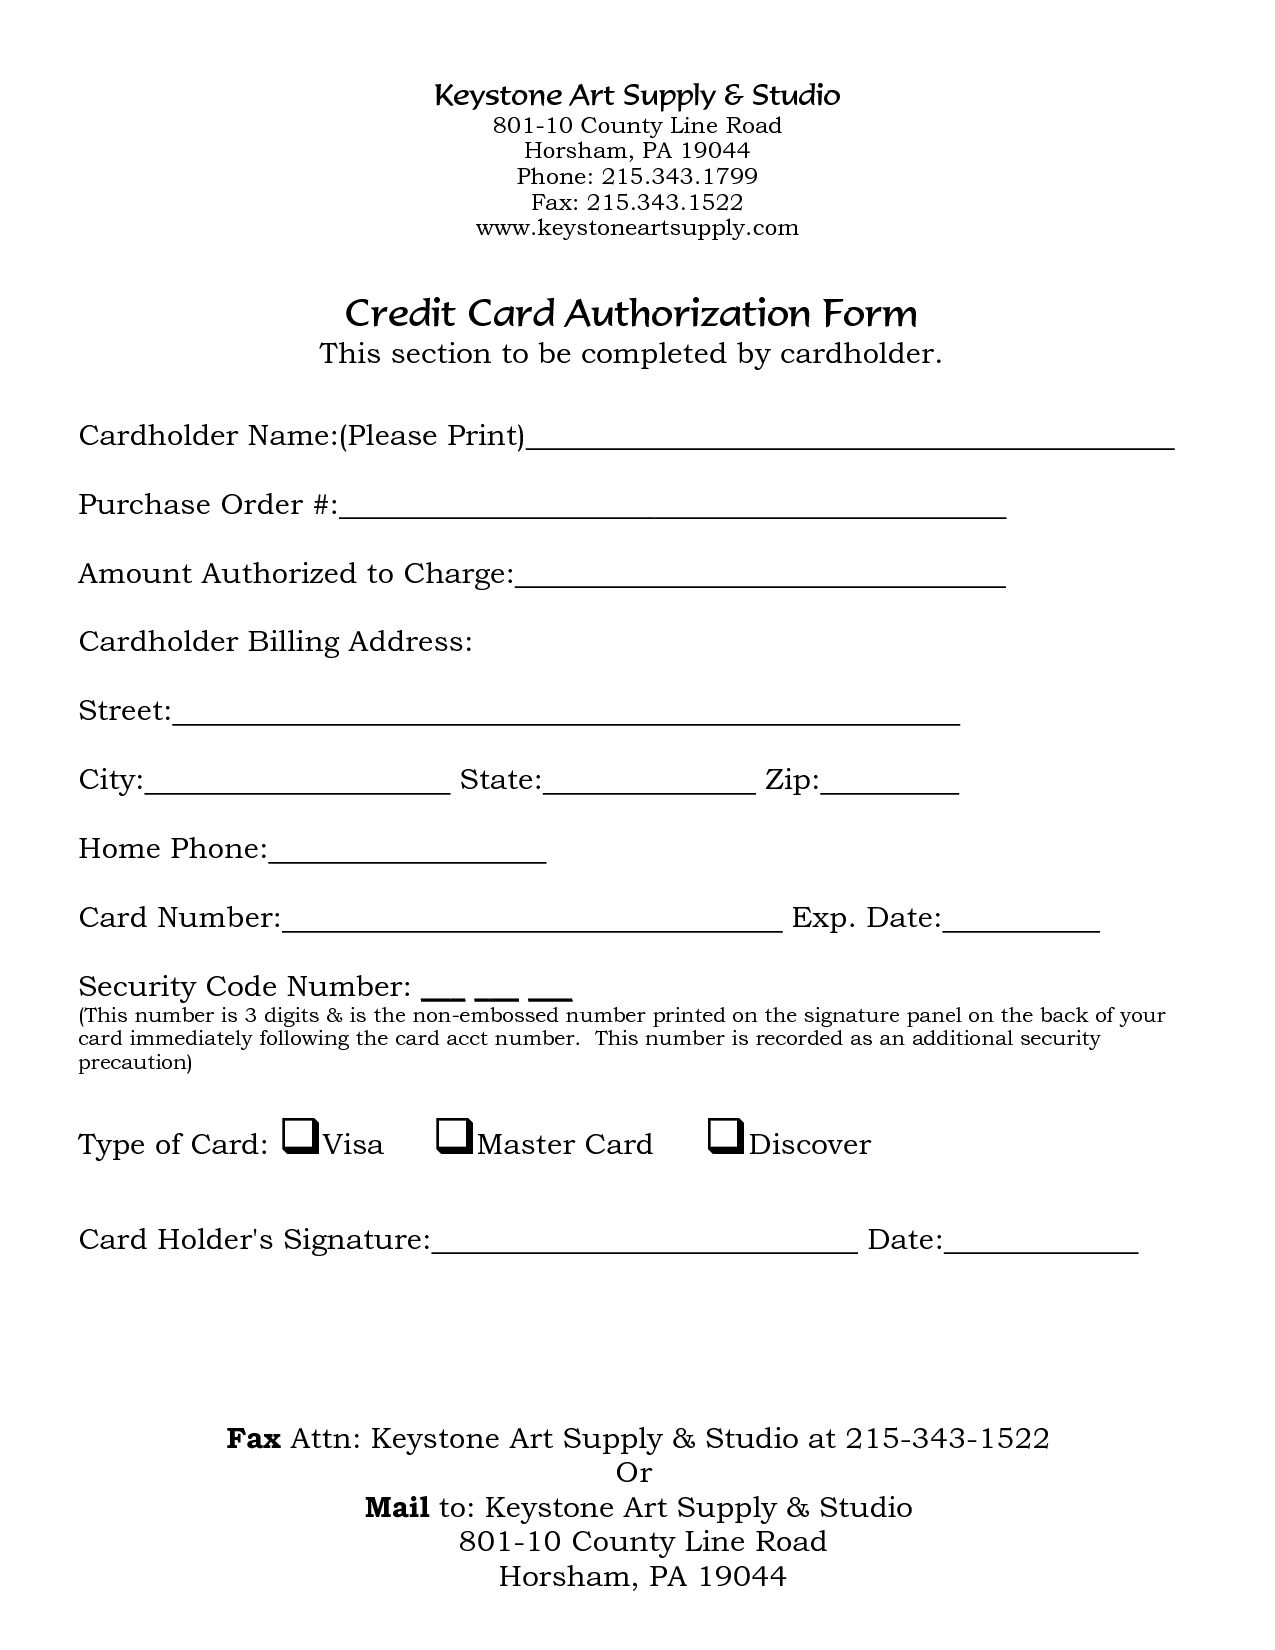 Credit Card Payment Form Template | Charlotte Clergy Coalition Pertaining To Credit Card Payment Slip Template